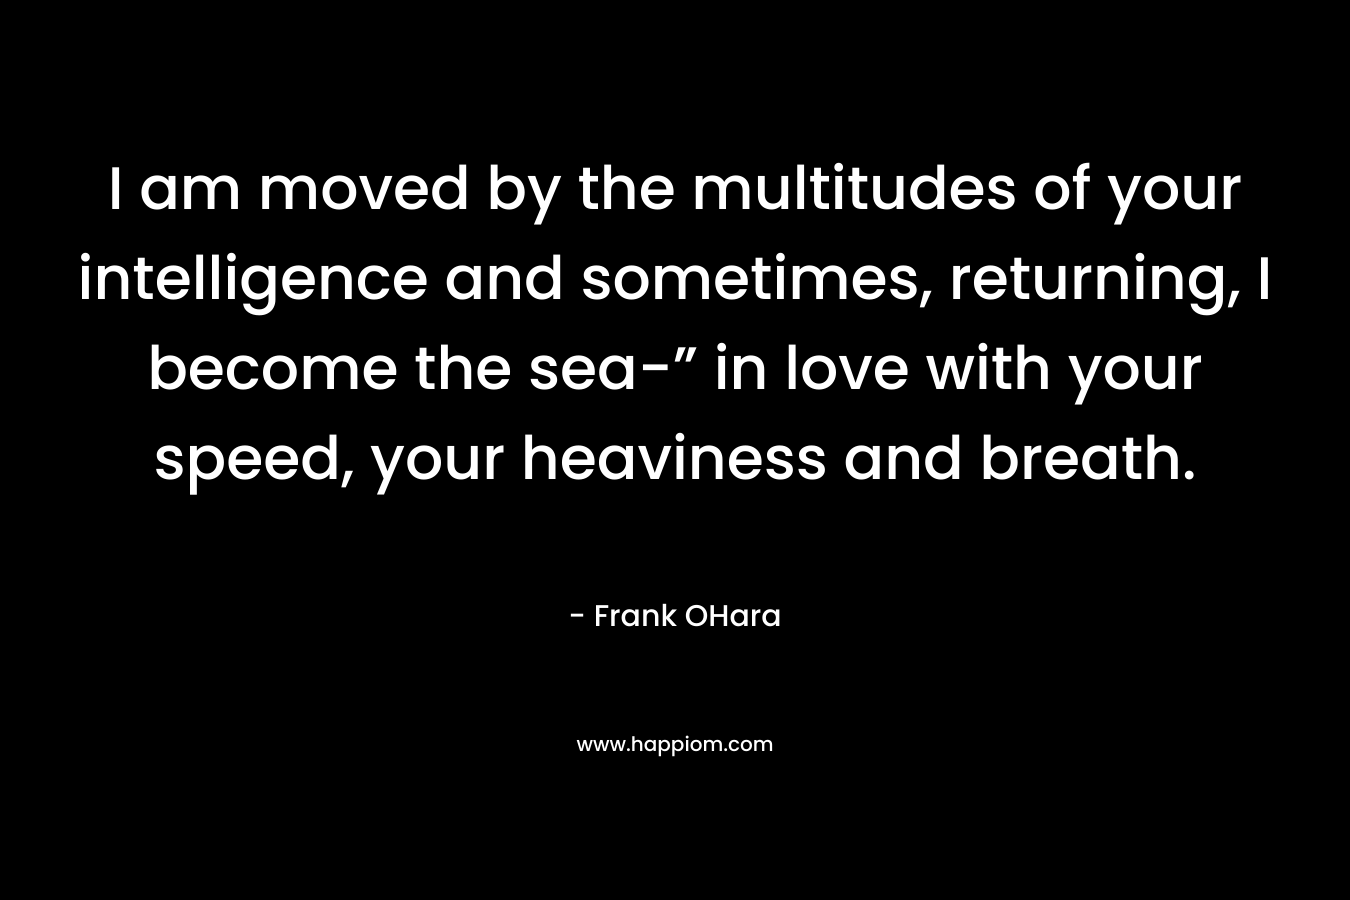 I am moved by the multitudes of your intelligence and sometimes, returning, I become the sea-” in love with your speed, your heaviness and breath. – Frank OHara